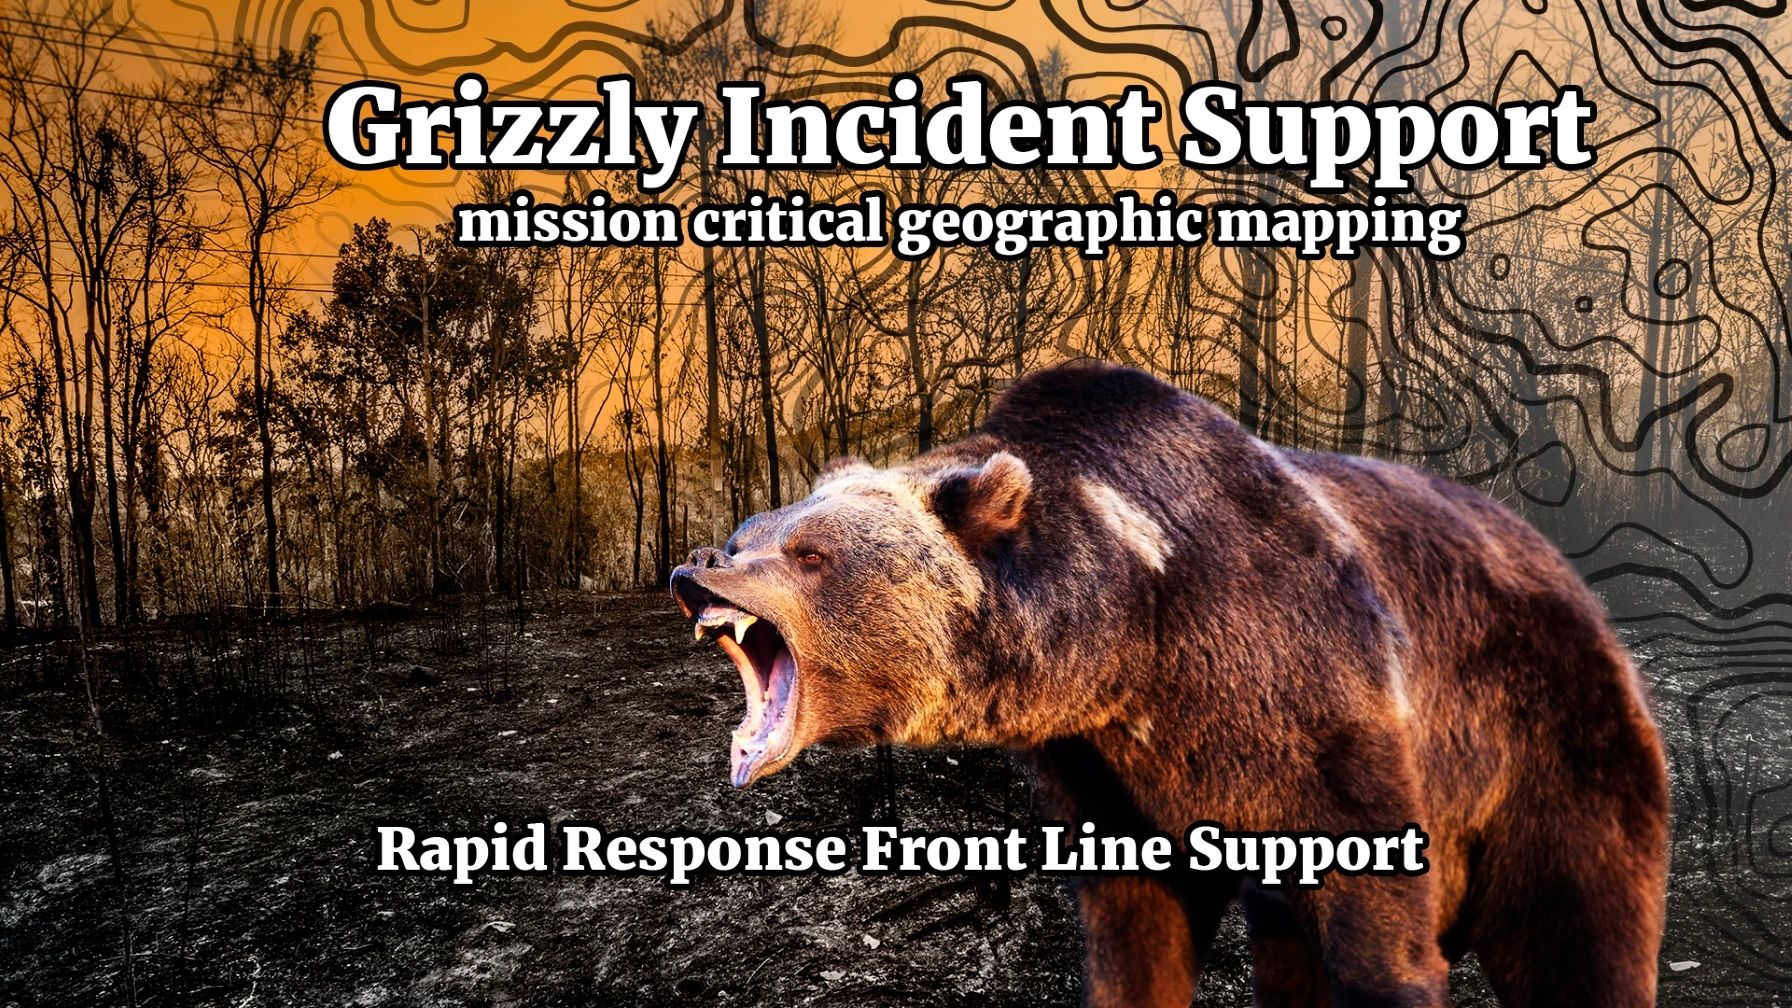 Grizzly Incident Support llc
(530) 332-8117